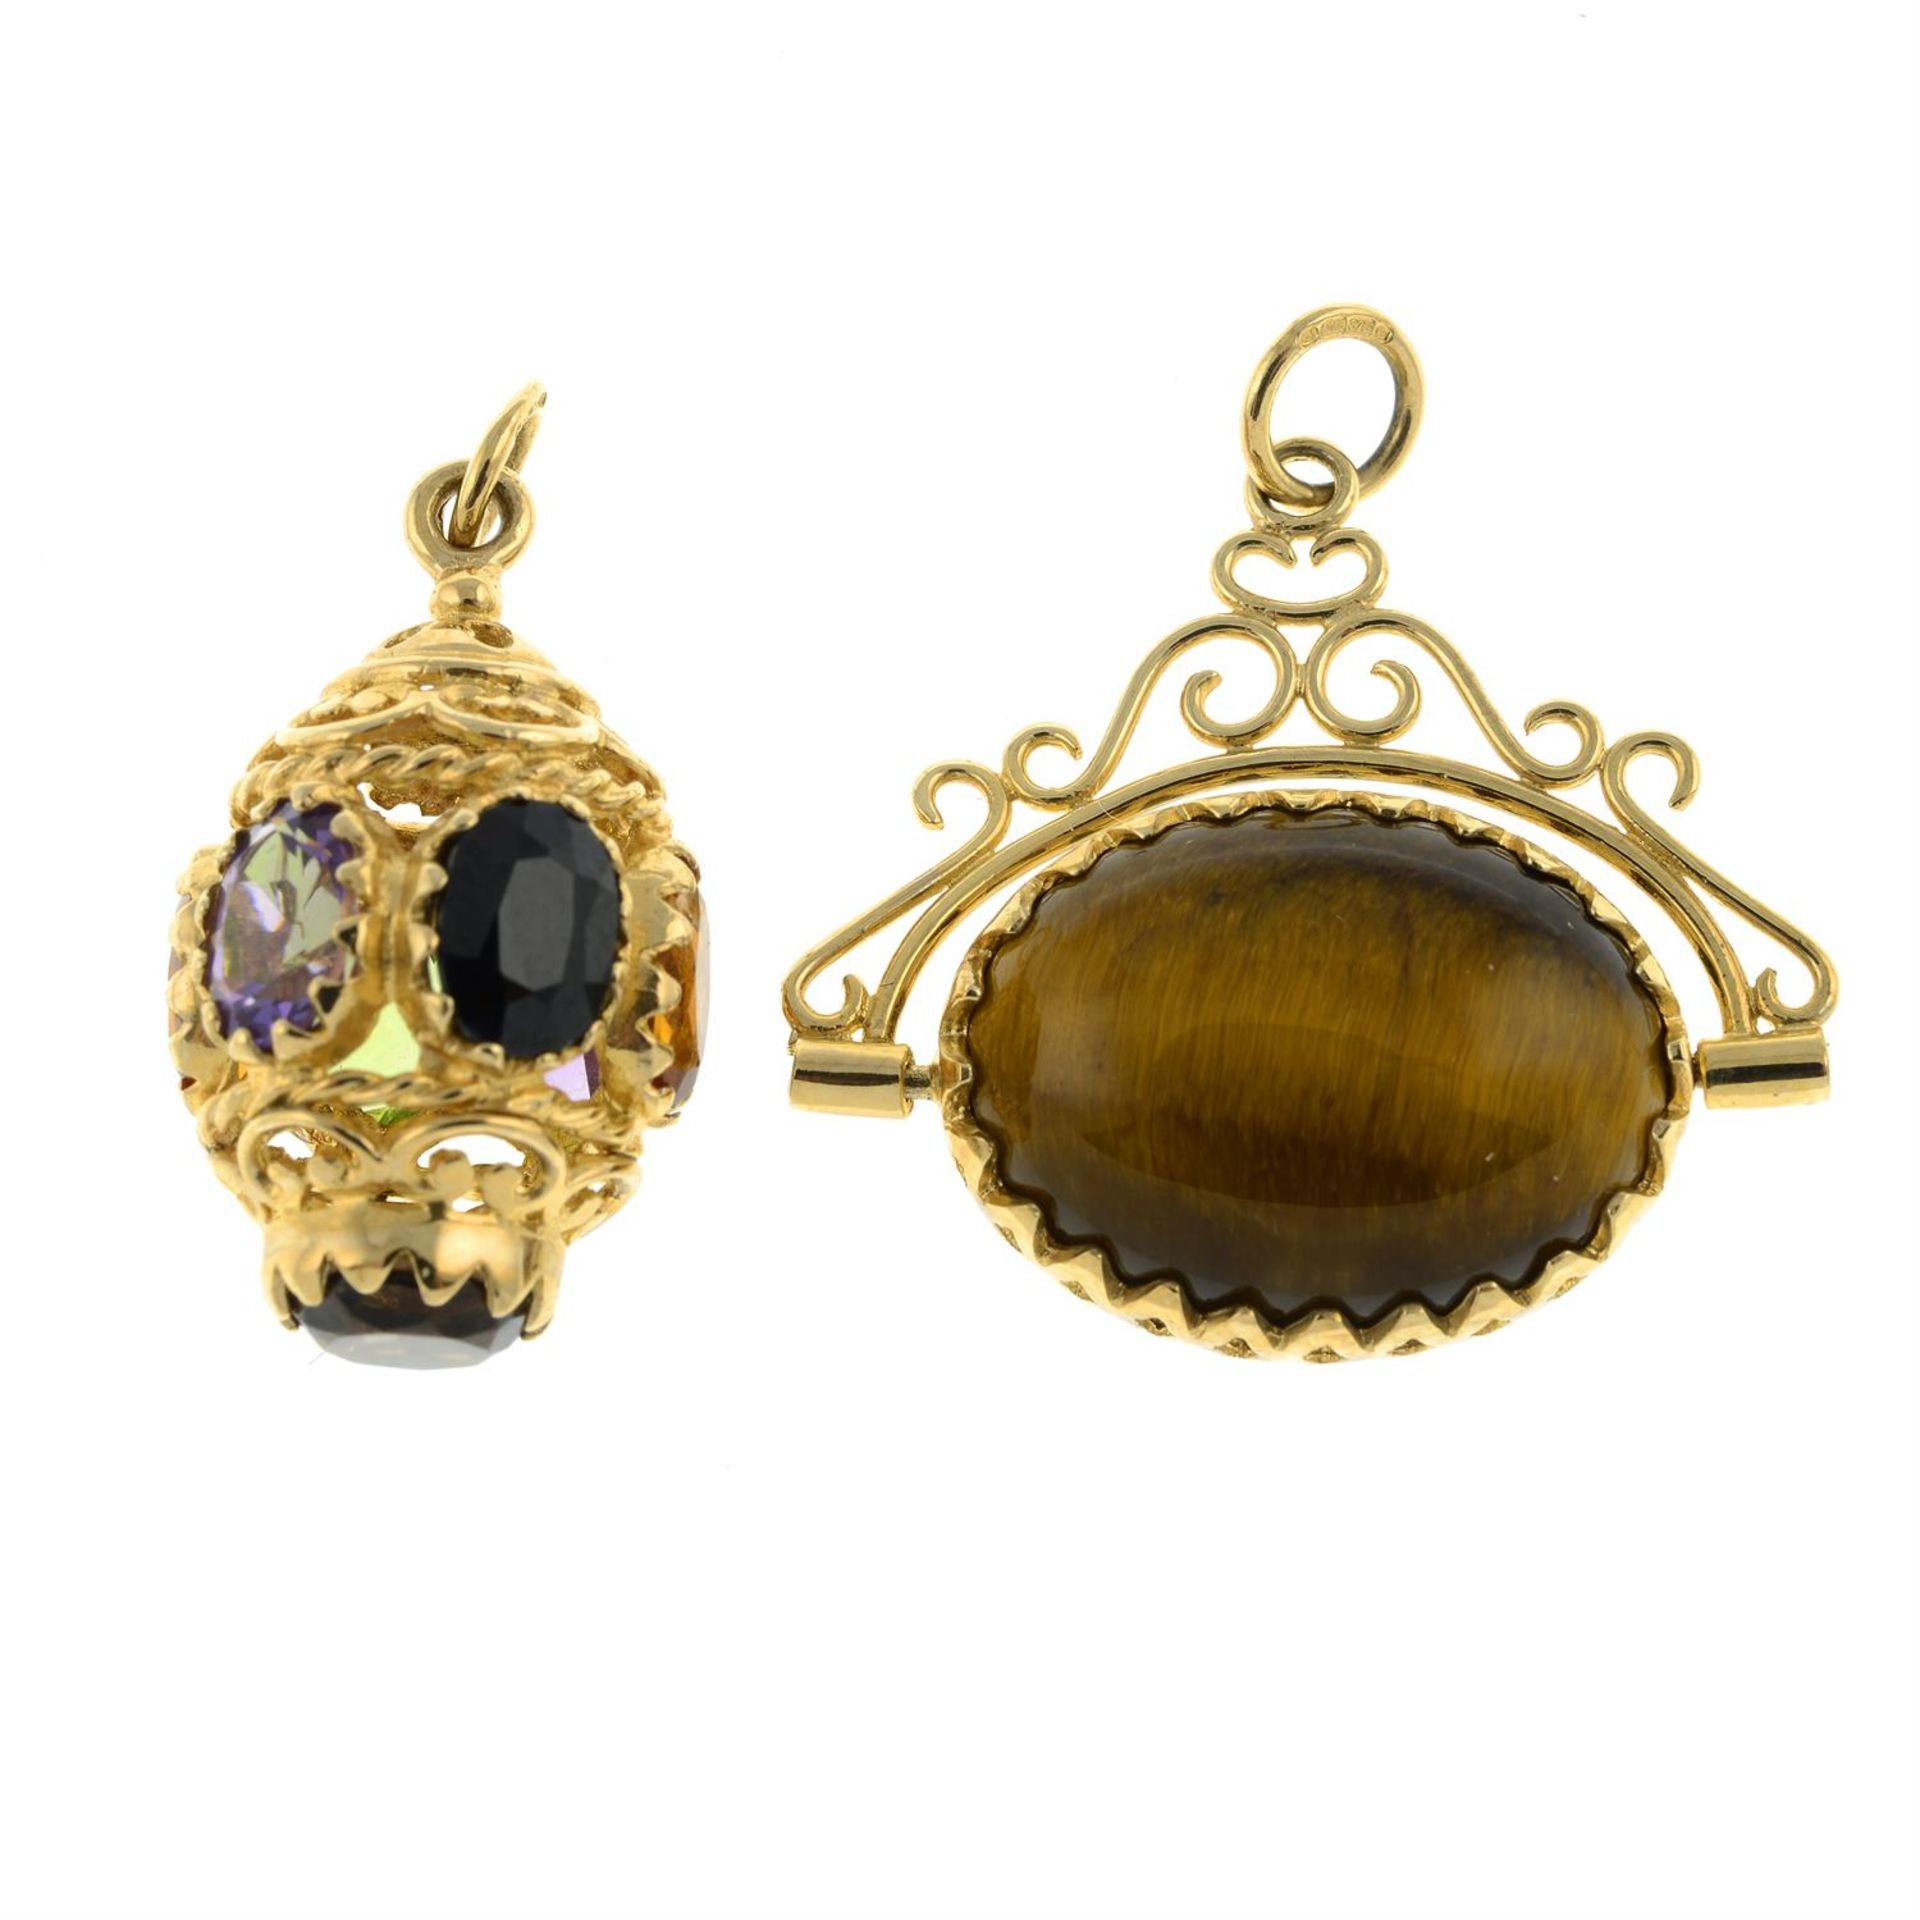 Two 9ct gold gem fobs